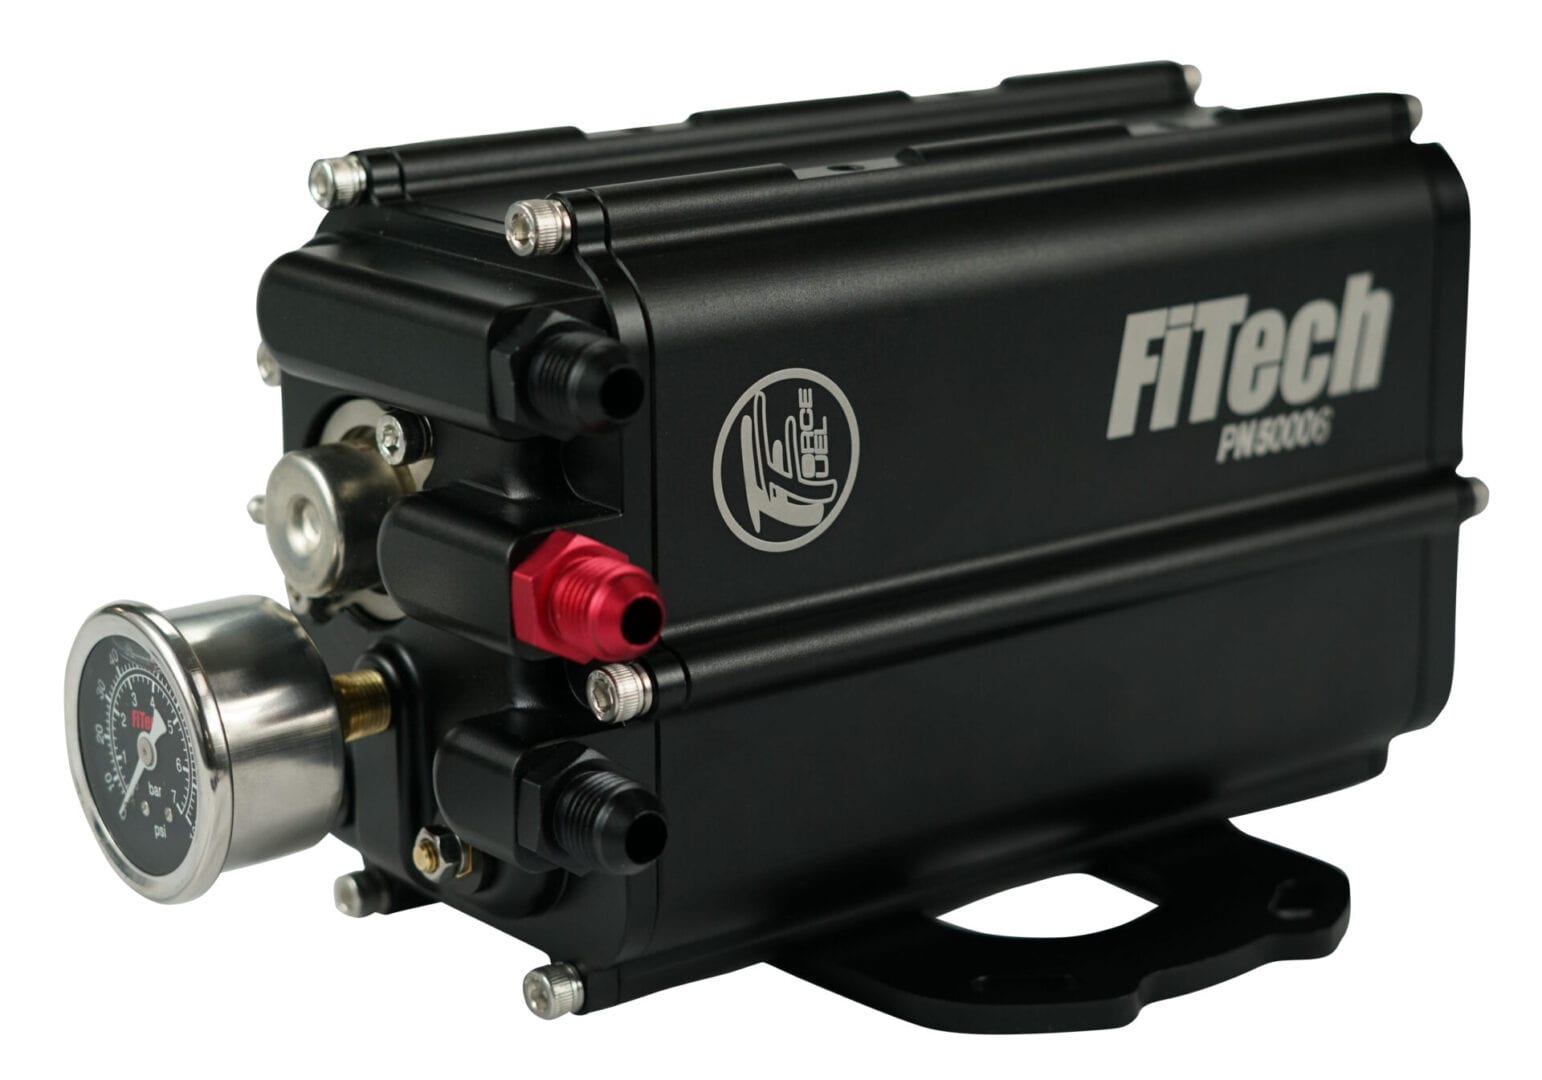 FiTech 35505 Easy Street 600 HP Classic Gold EFI Sys w/ Force Fuel Mini Delivery Master Kit